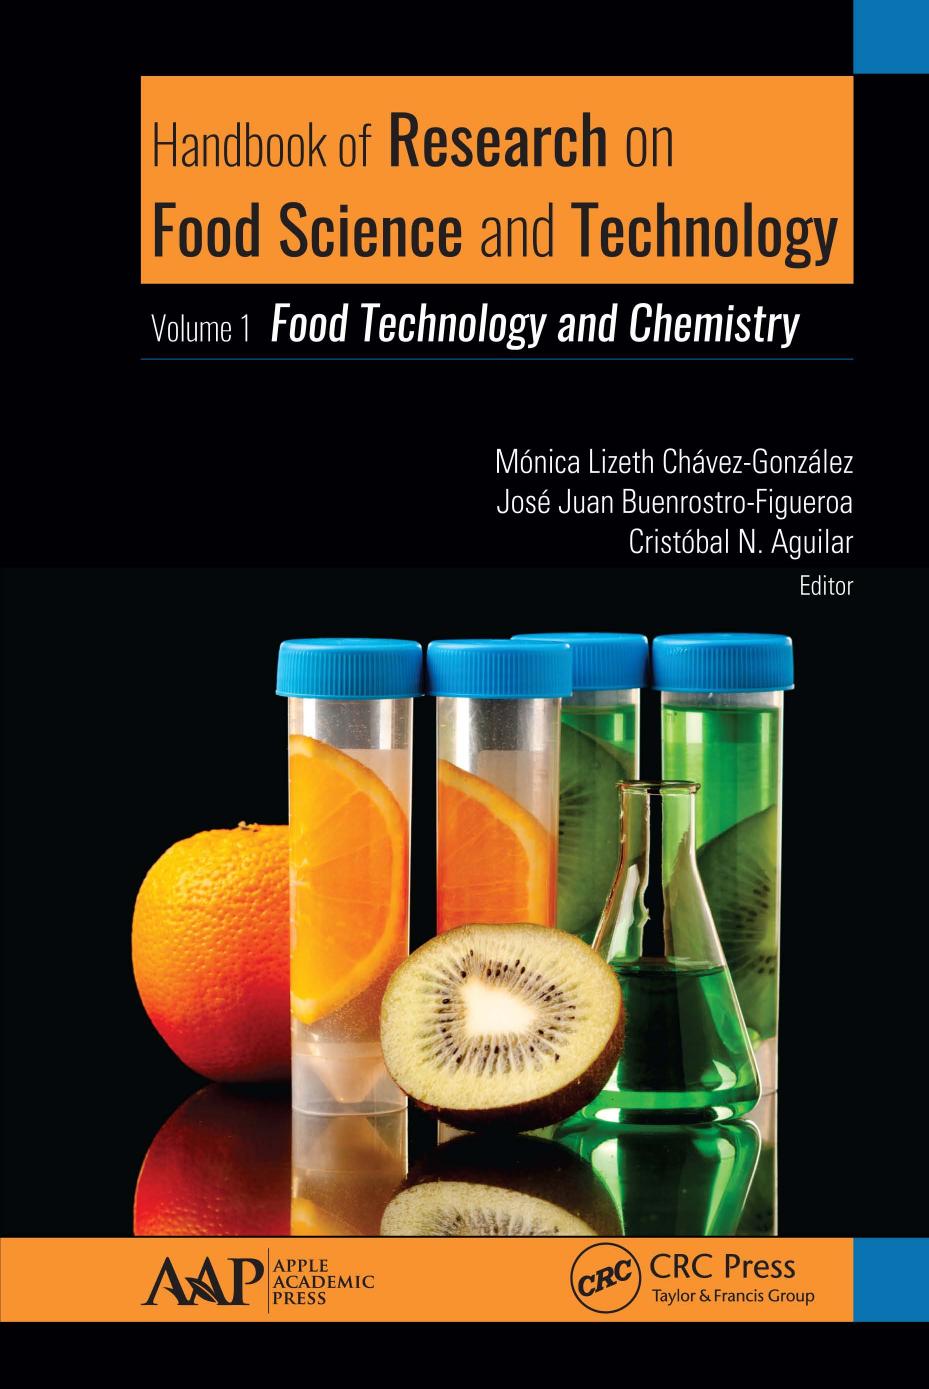 HANDBOOK OF RESEARCH ON FOOD SCIENCE AND TECHNOLOGY